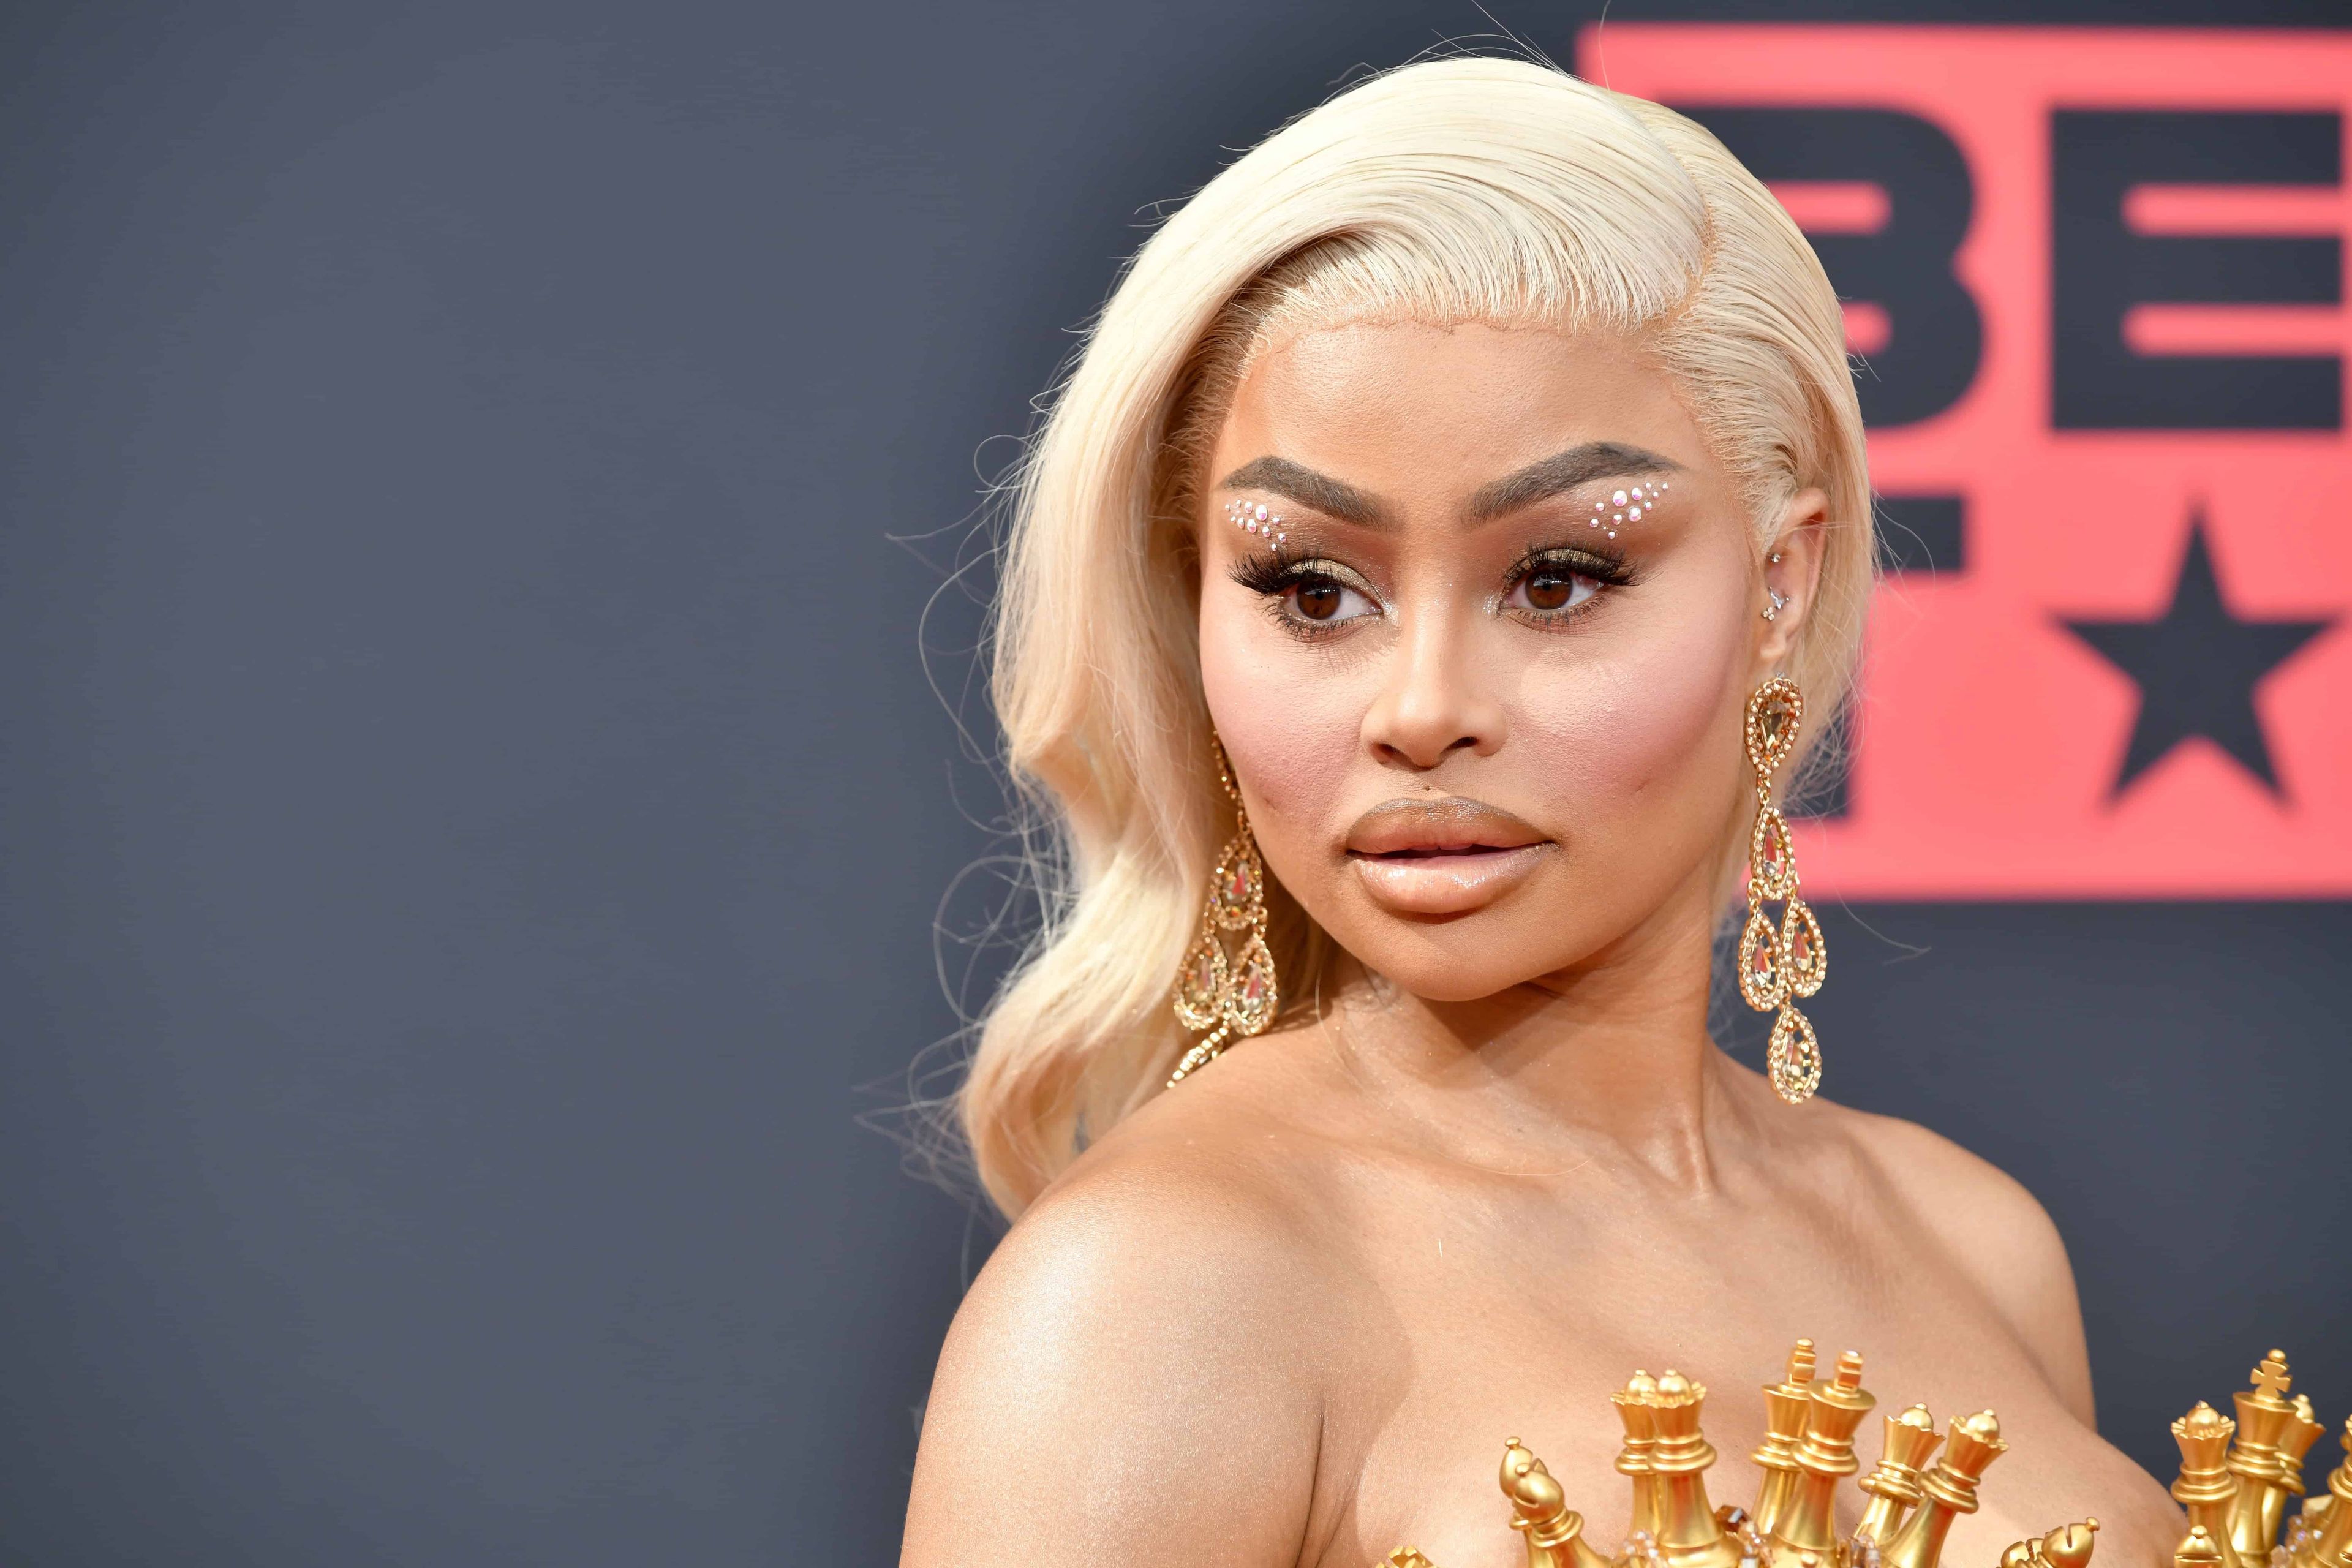 Blac Chyna Reportedly Pregnant With Baby Number 3!